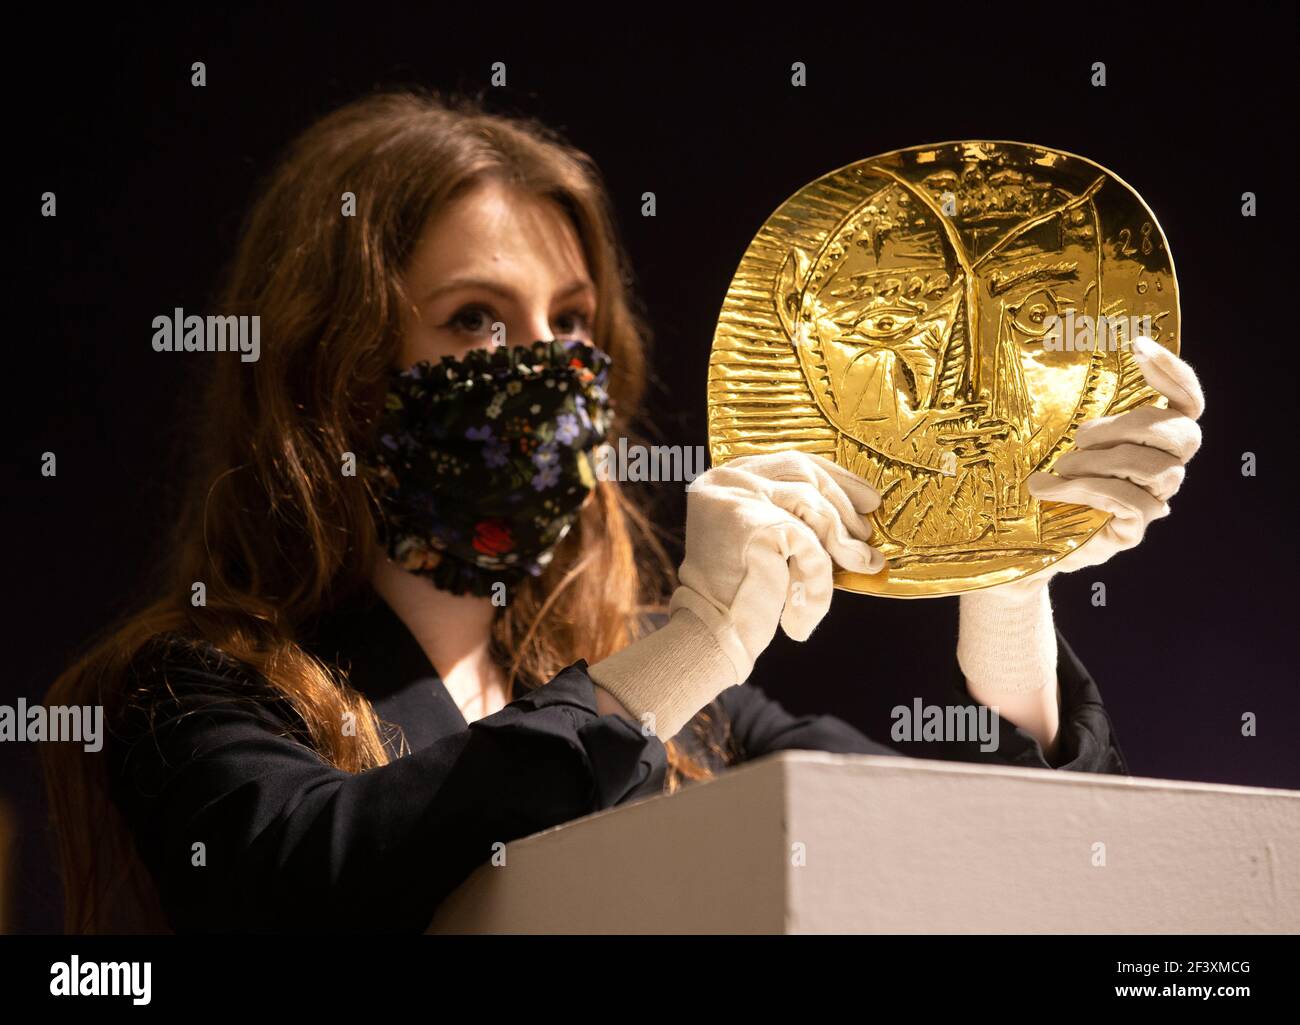 London, UK. 18th Mar, 2021. 'Visage de Faune', a 22 carat Gold plate by Pablo Picasso, estimated £250,000-350,000. The auction of artworks by Pablo Picasso will take place in London on March 23rd. Credit: Mark Thomas/Alamy Live News Stock Photo